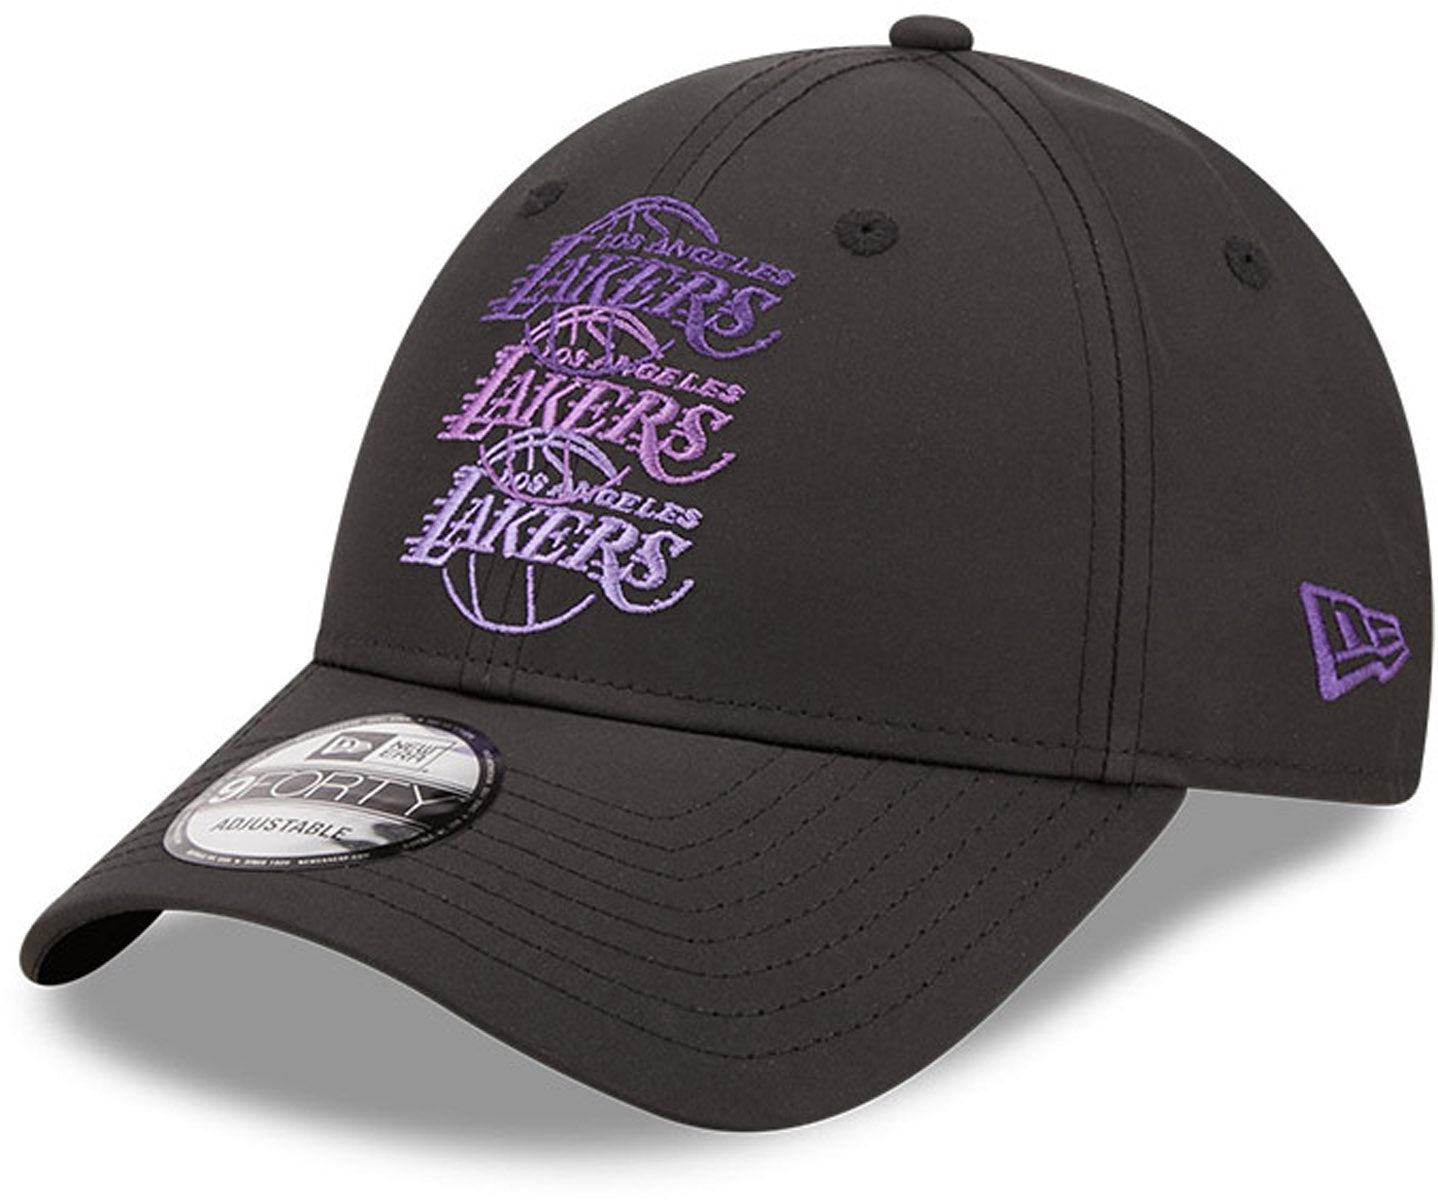 Los Angeles Lakers New Era The League 9FORTY Adjustable Cap